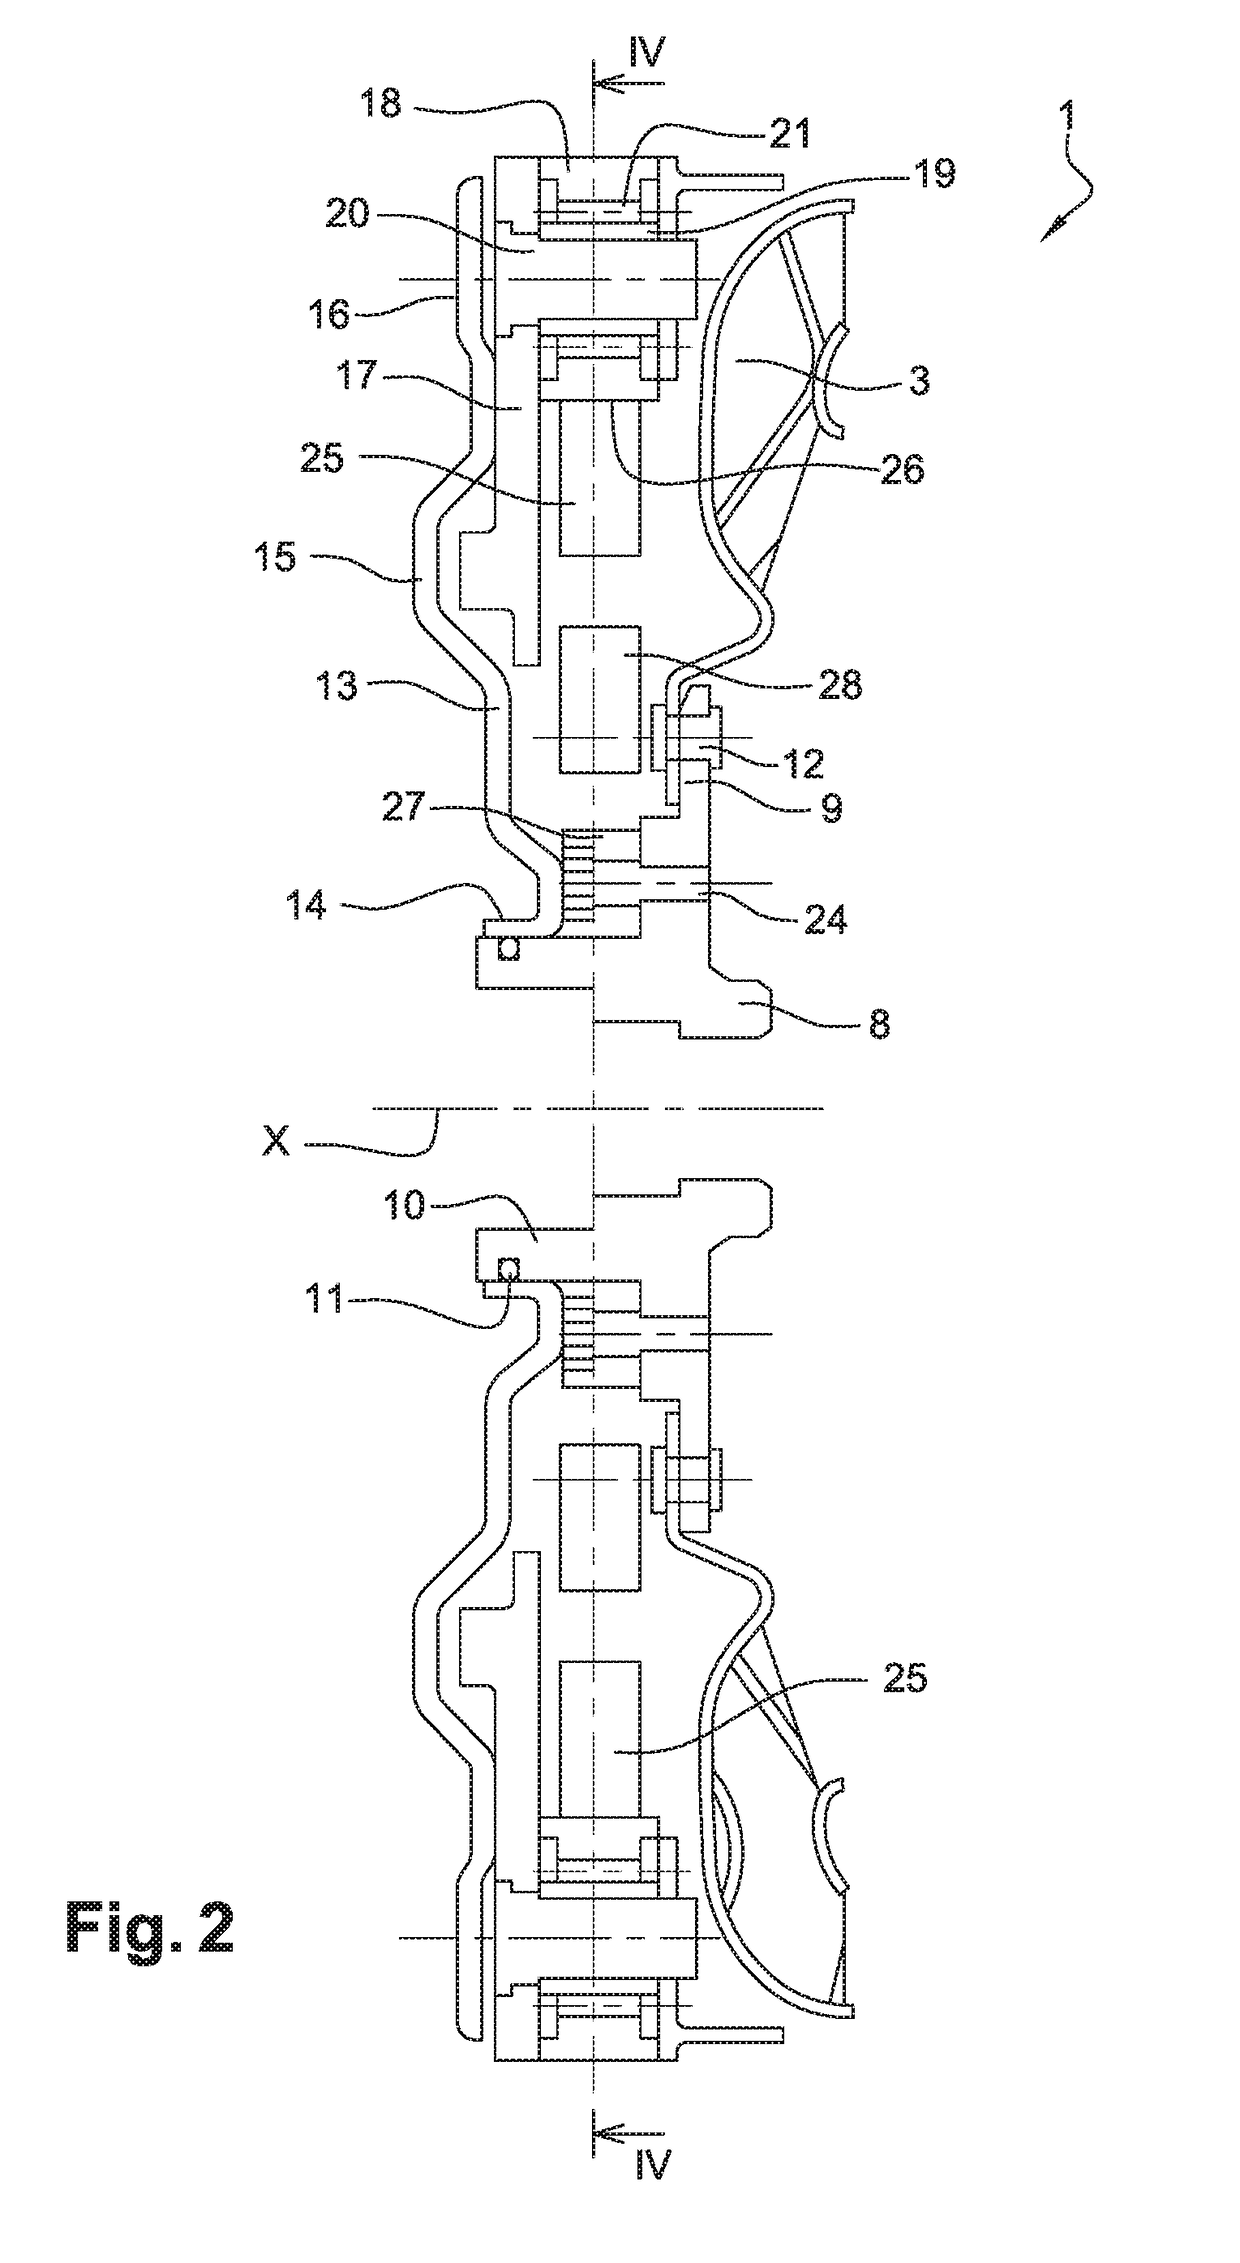 Torque transmission device, more particularly for a motor vehicle